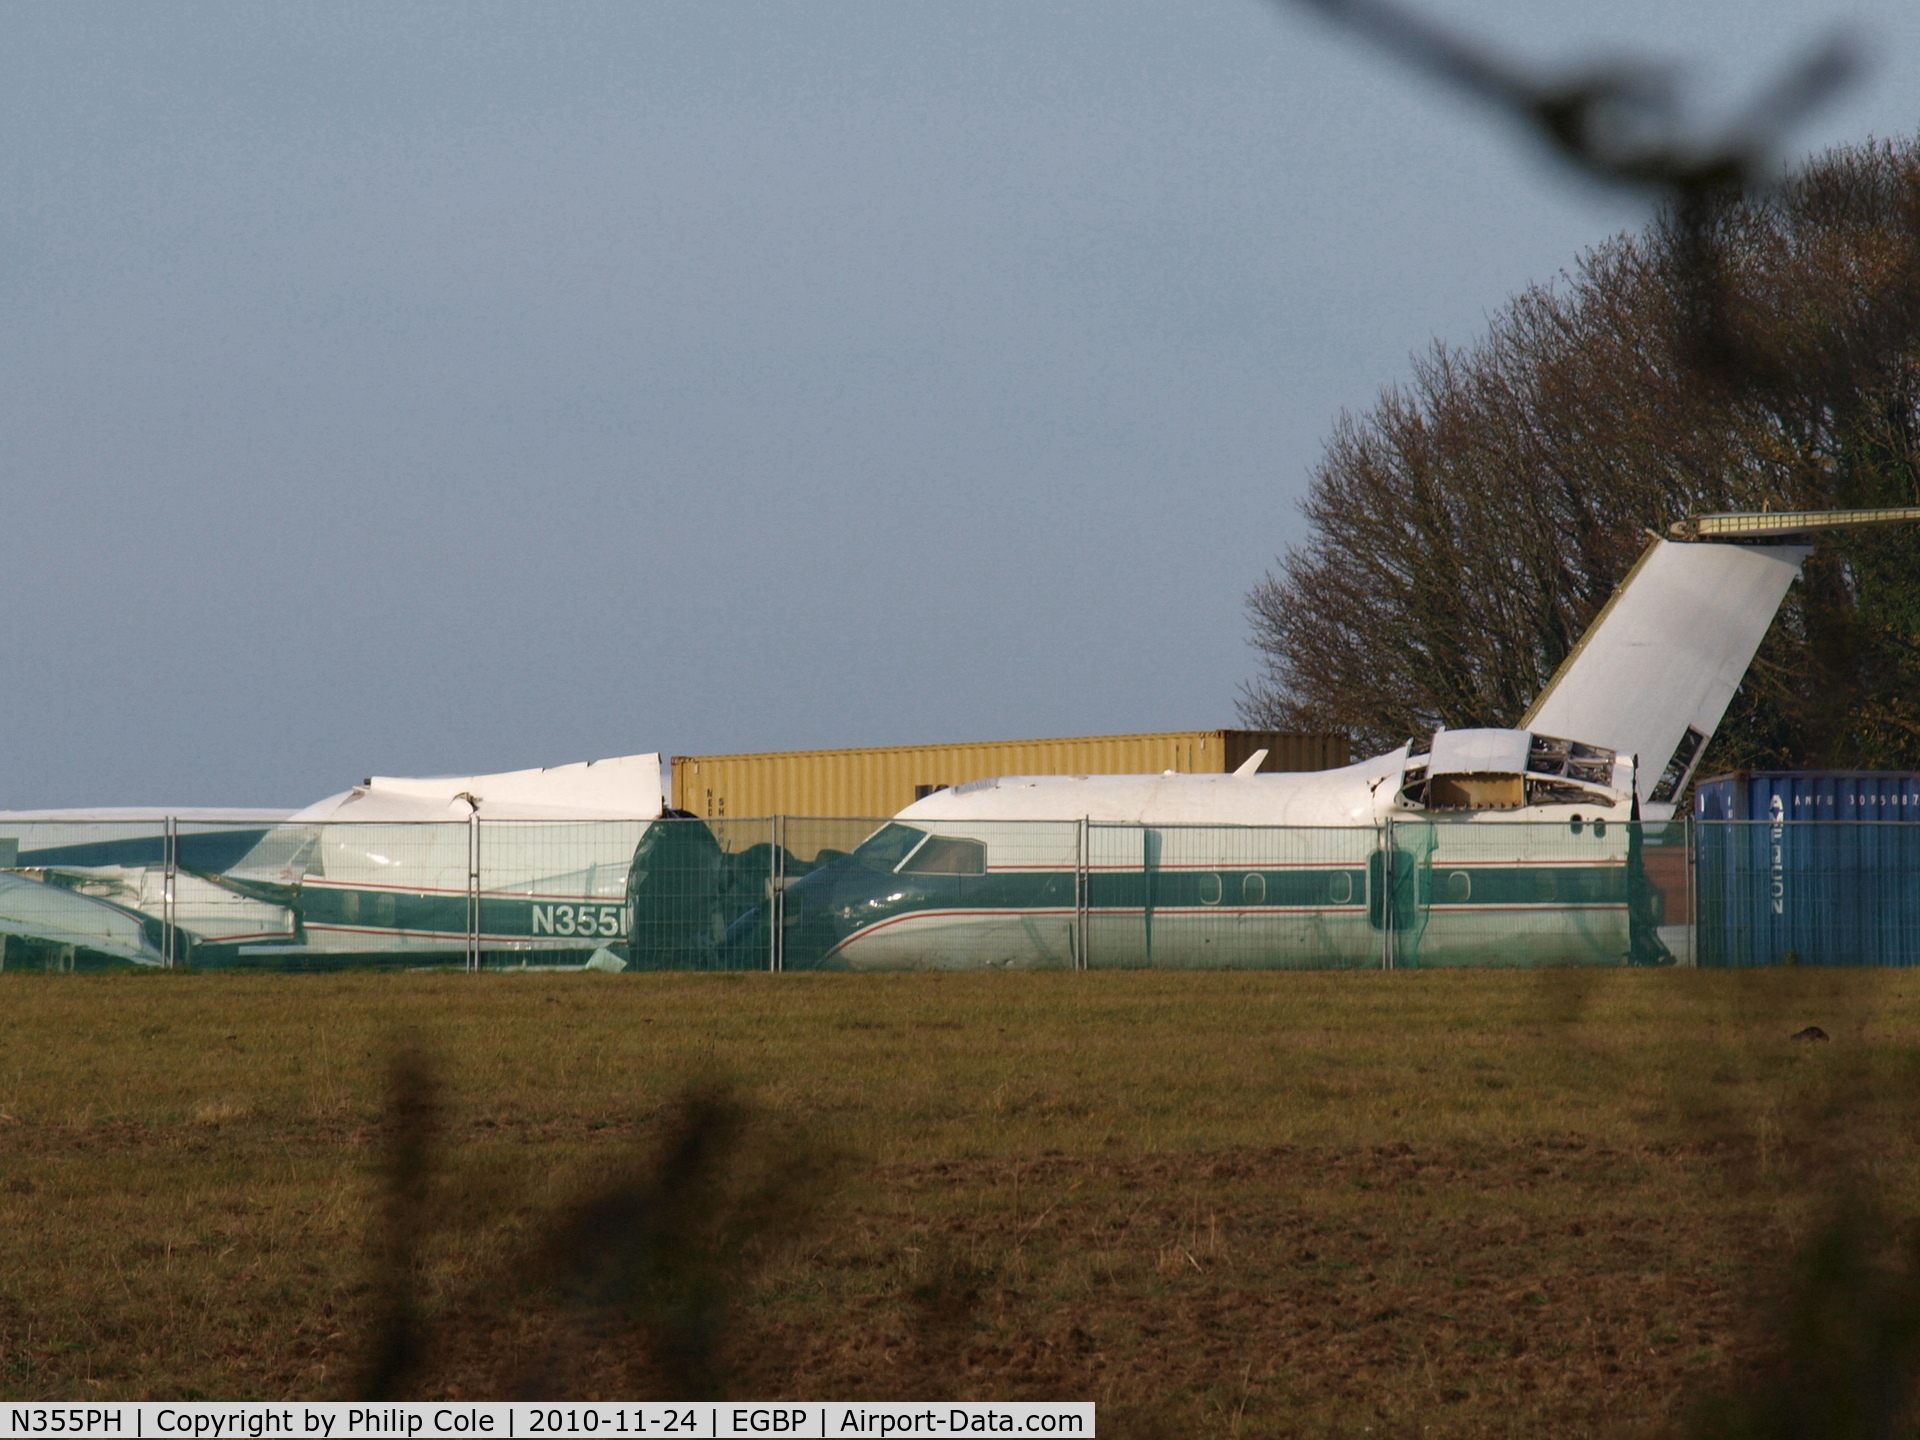 N355PH, 1997 De Havilland Canada DHC-8/Q200 Dash 8 C/N 500, Crashed Remains stored in Compound for scrapping